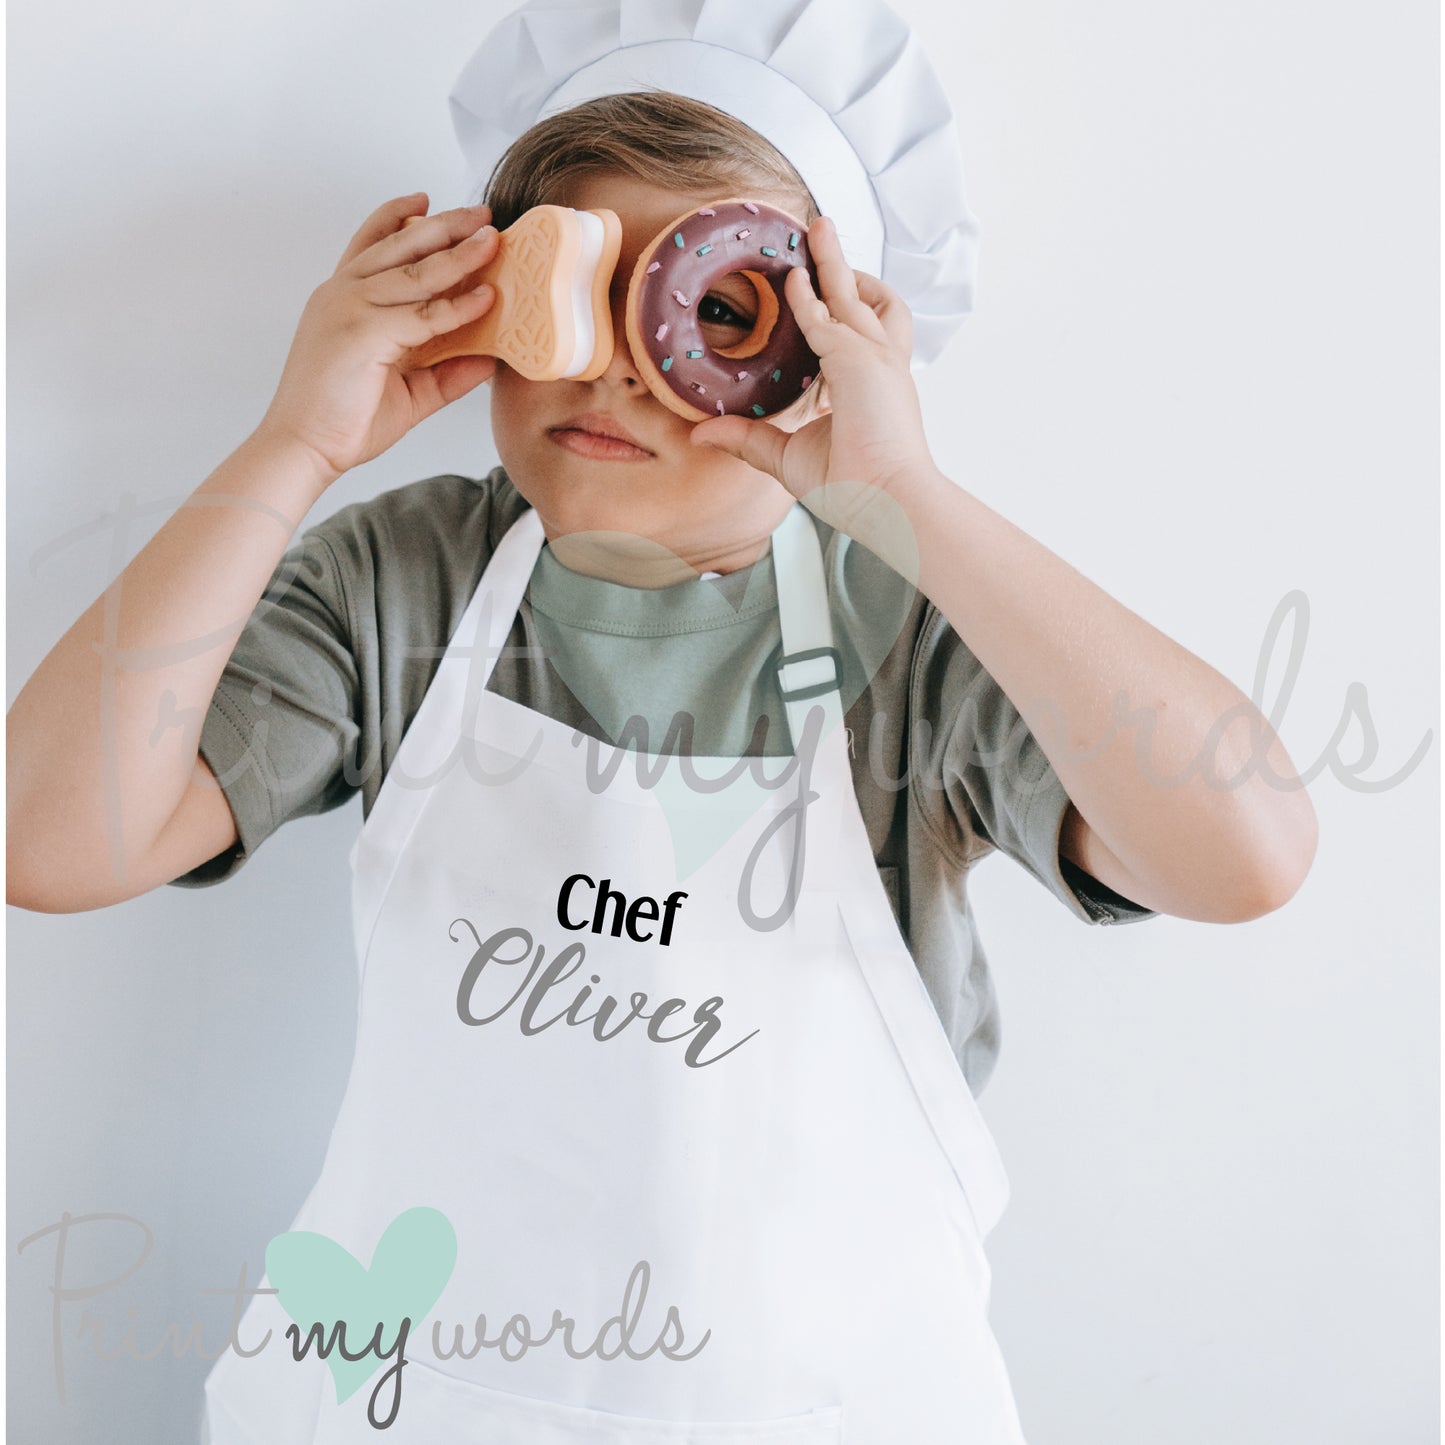 Children's Personalised Kitchen Cooking Apron Bib - Personalised Chef